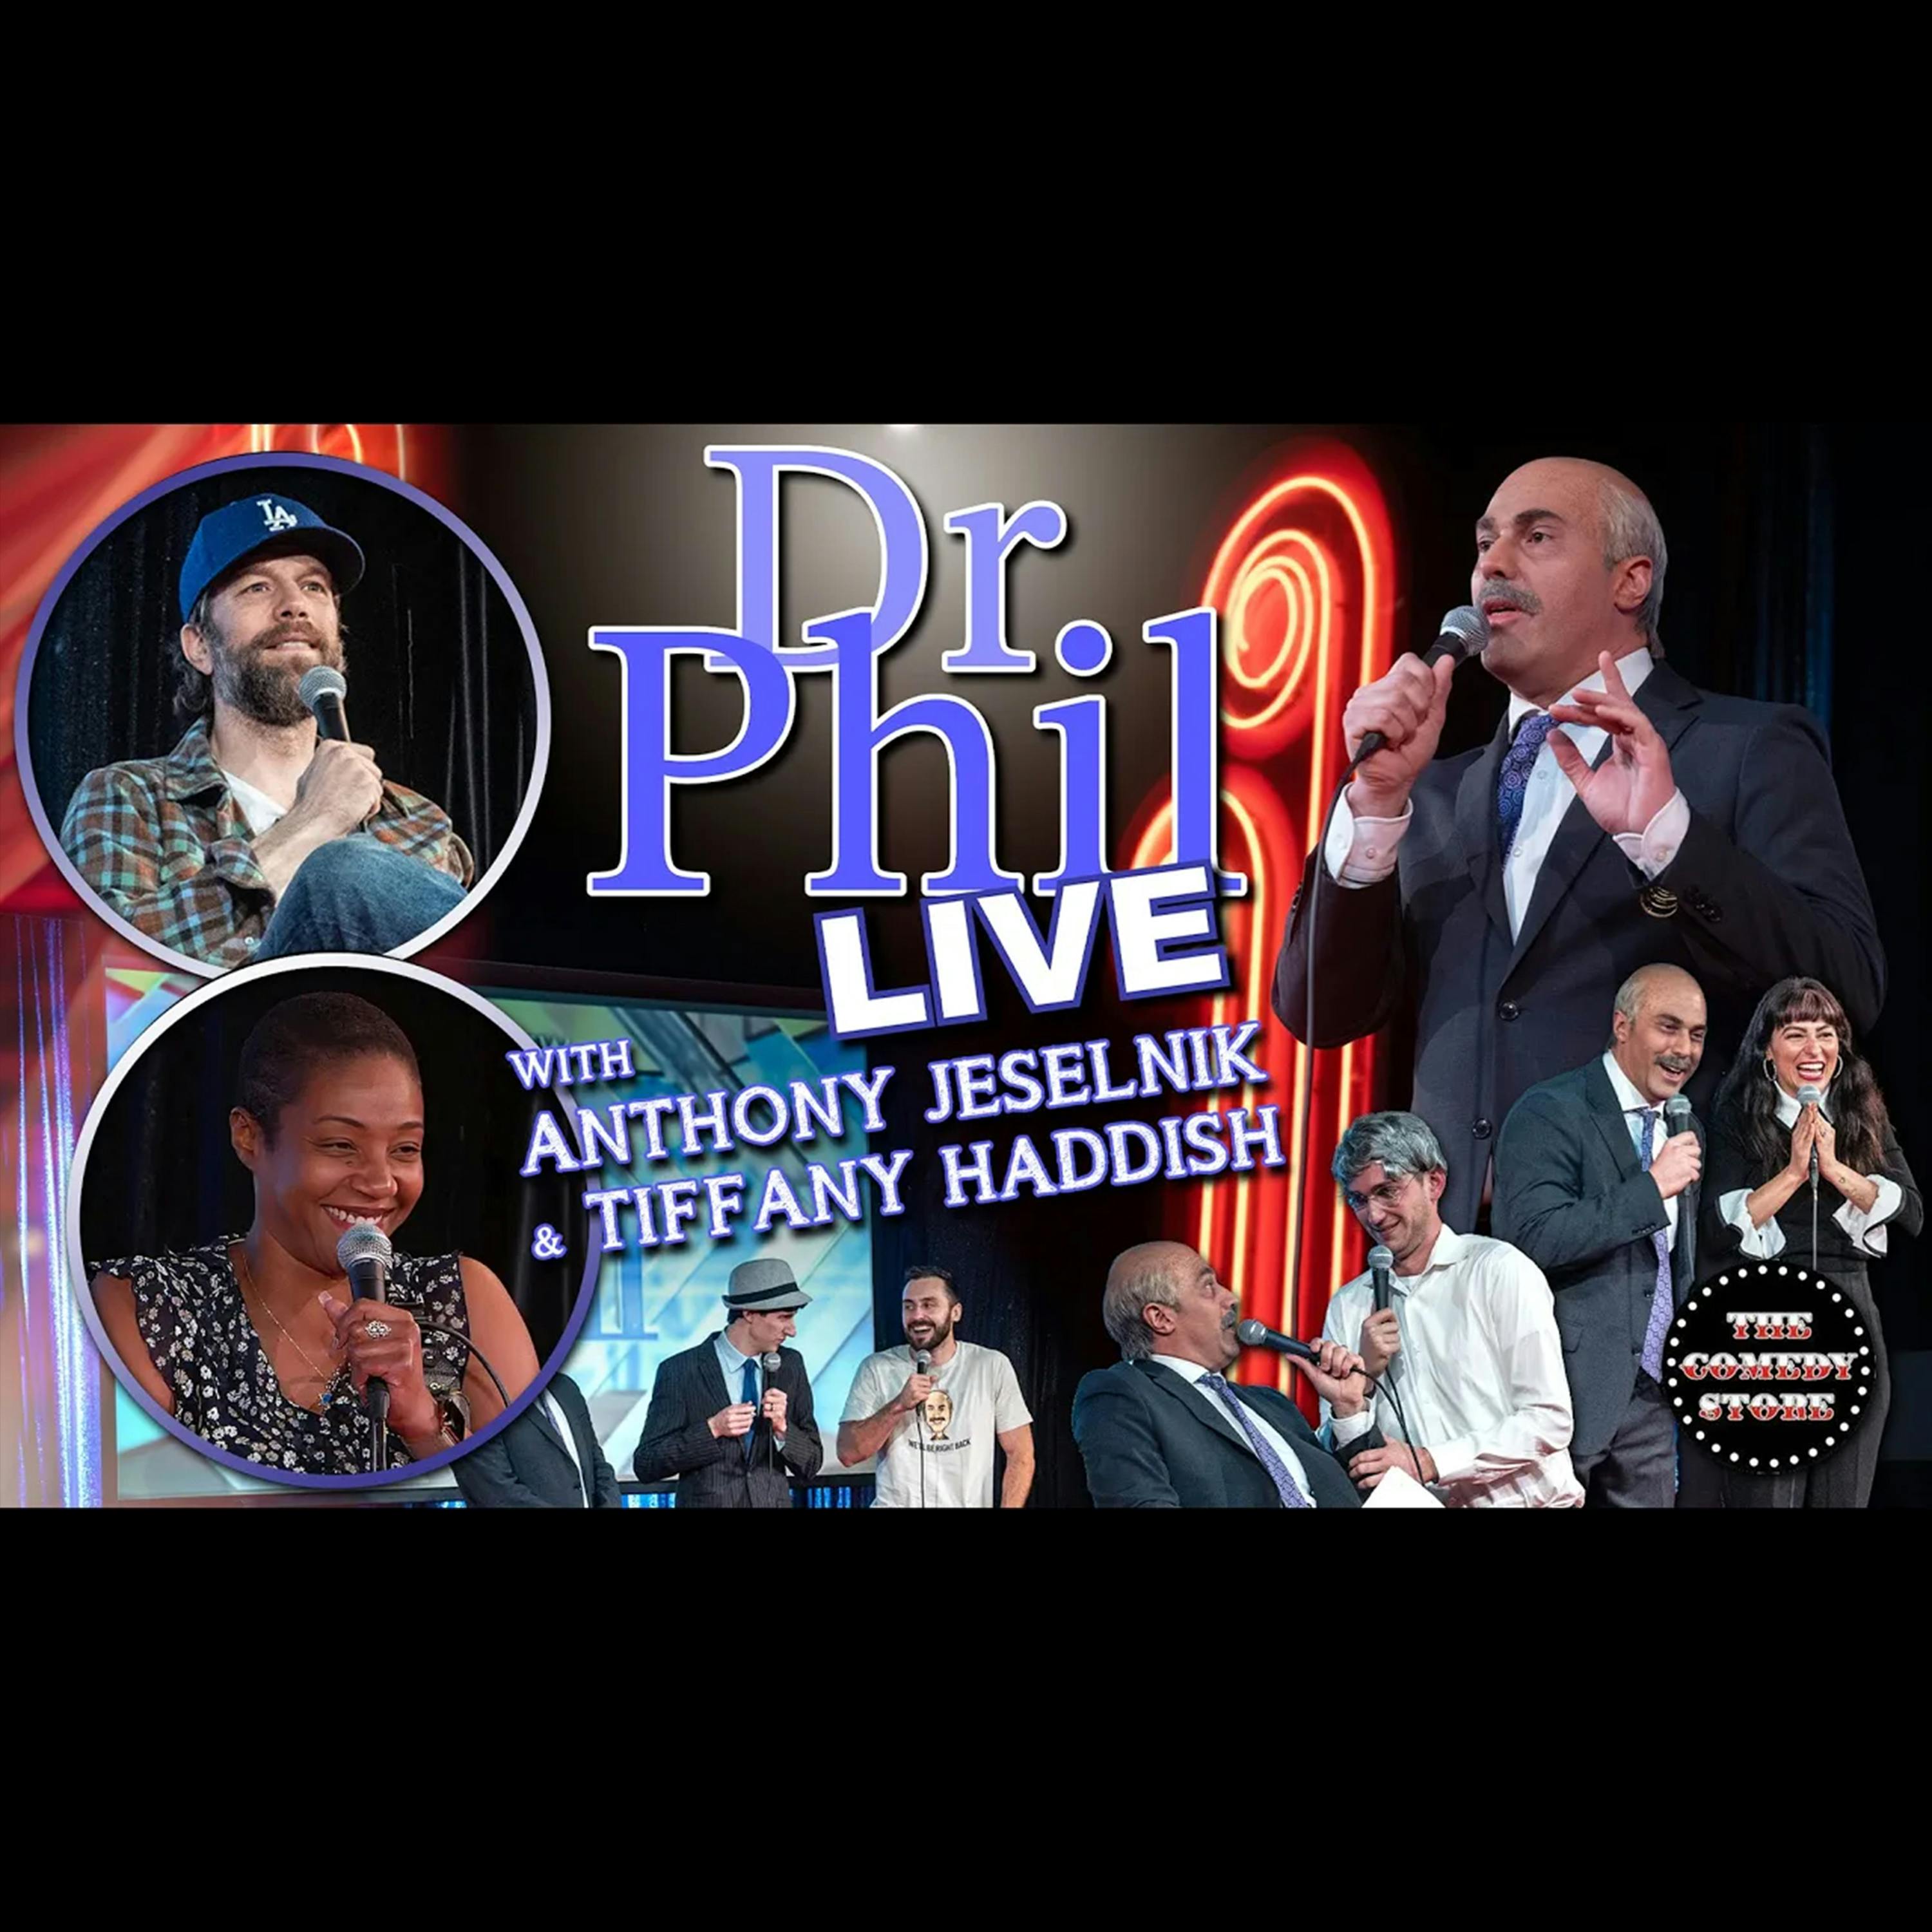 #750 - Dr. Phil LIVE! With Anthony Jeselnik, Tiffany Haddish, and so many more!